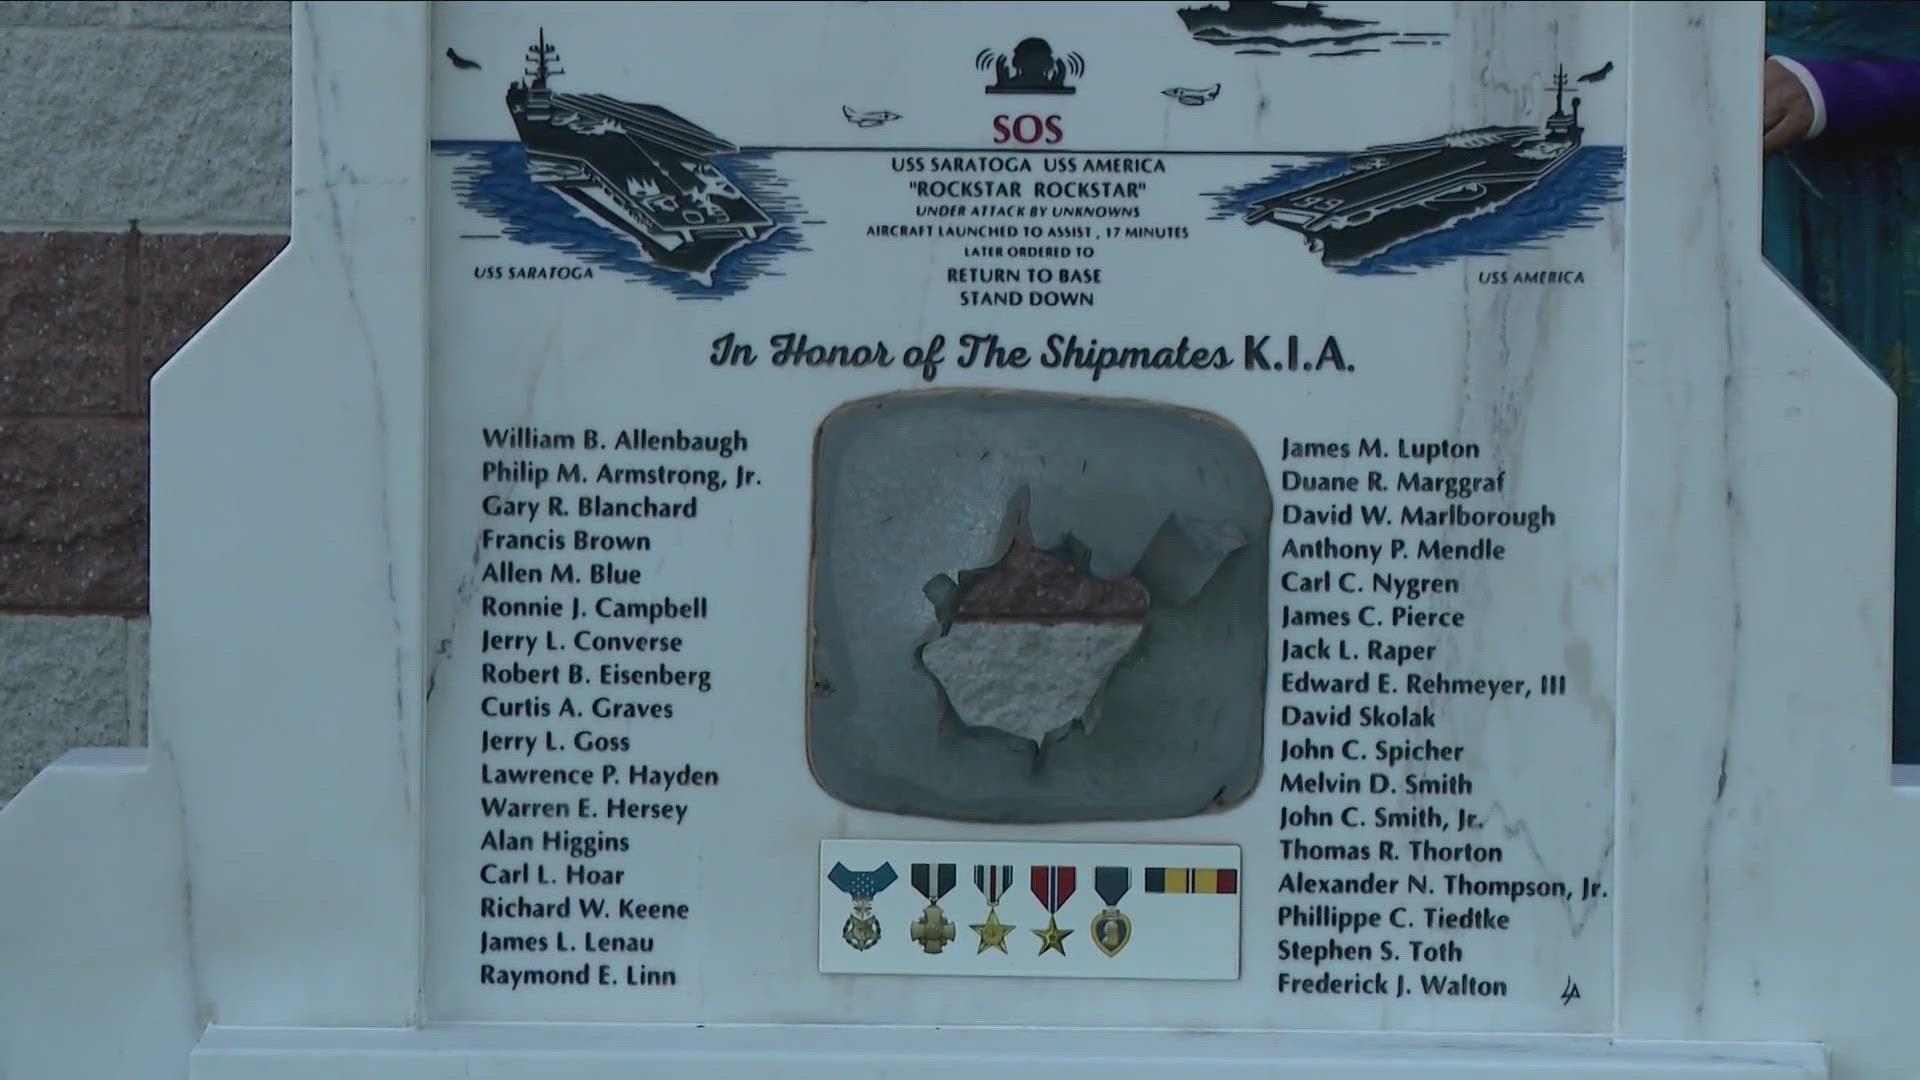 There is now a new monument in their honor near the Norfolk Naval Base in Virginia which was the ship's home port.